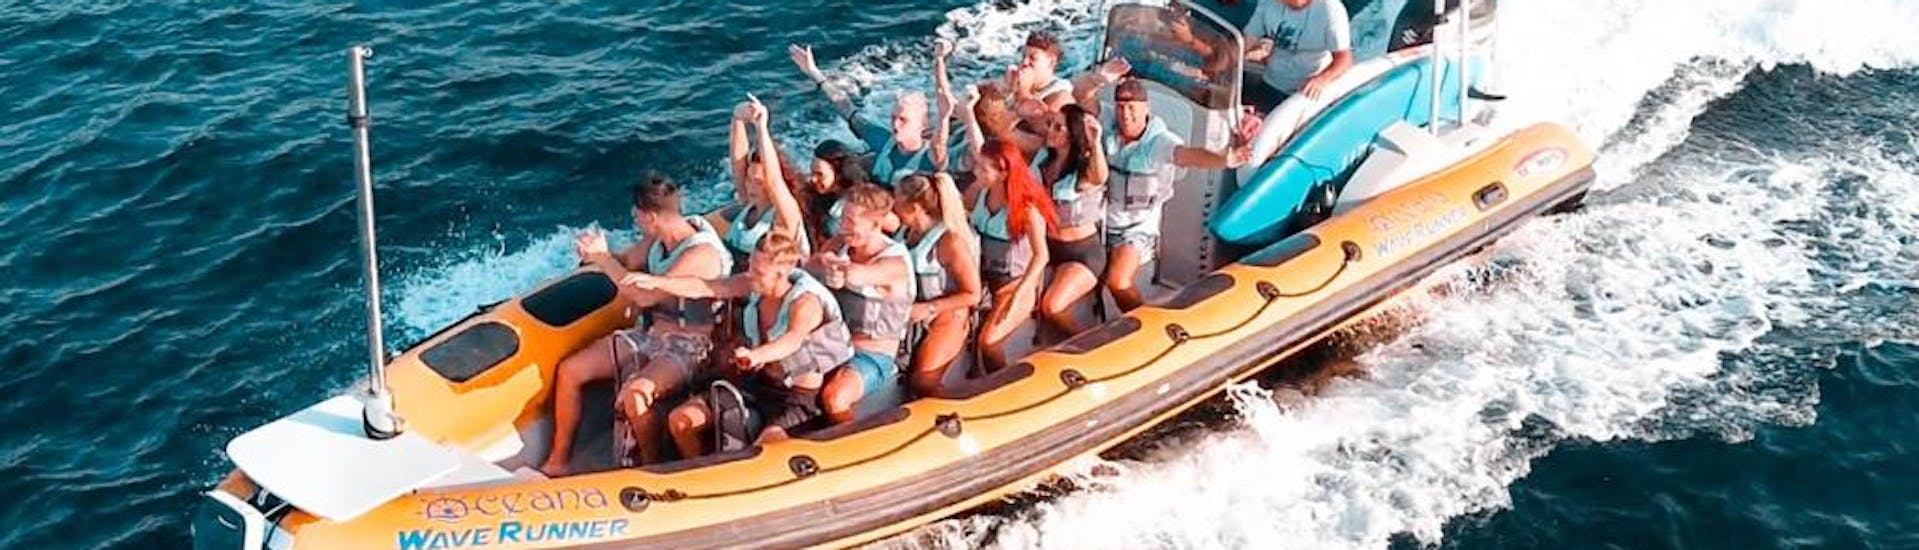 Participants on a speedboat surrounded speeding and having fun surrounded by splashing water in Alcúdia Bay during a boat trip from Can Picafort to Llevant Natural Park with North Coast Adventure Mallorca.